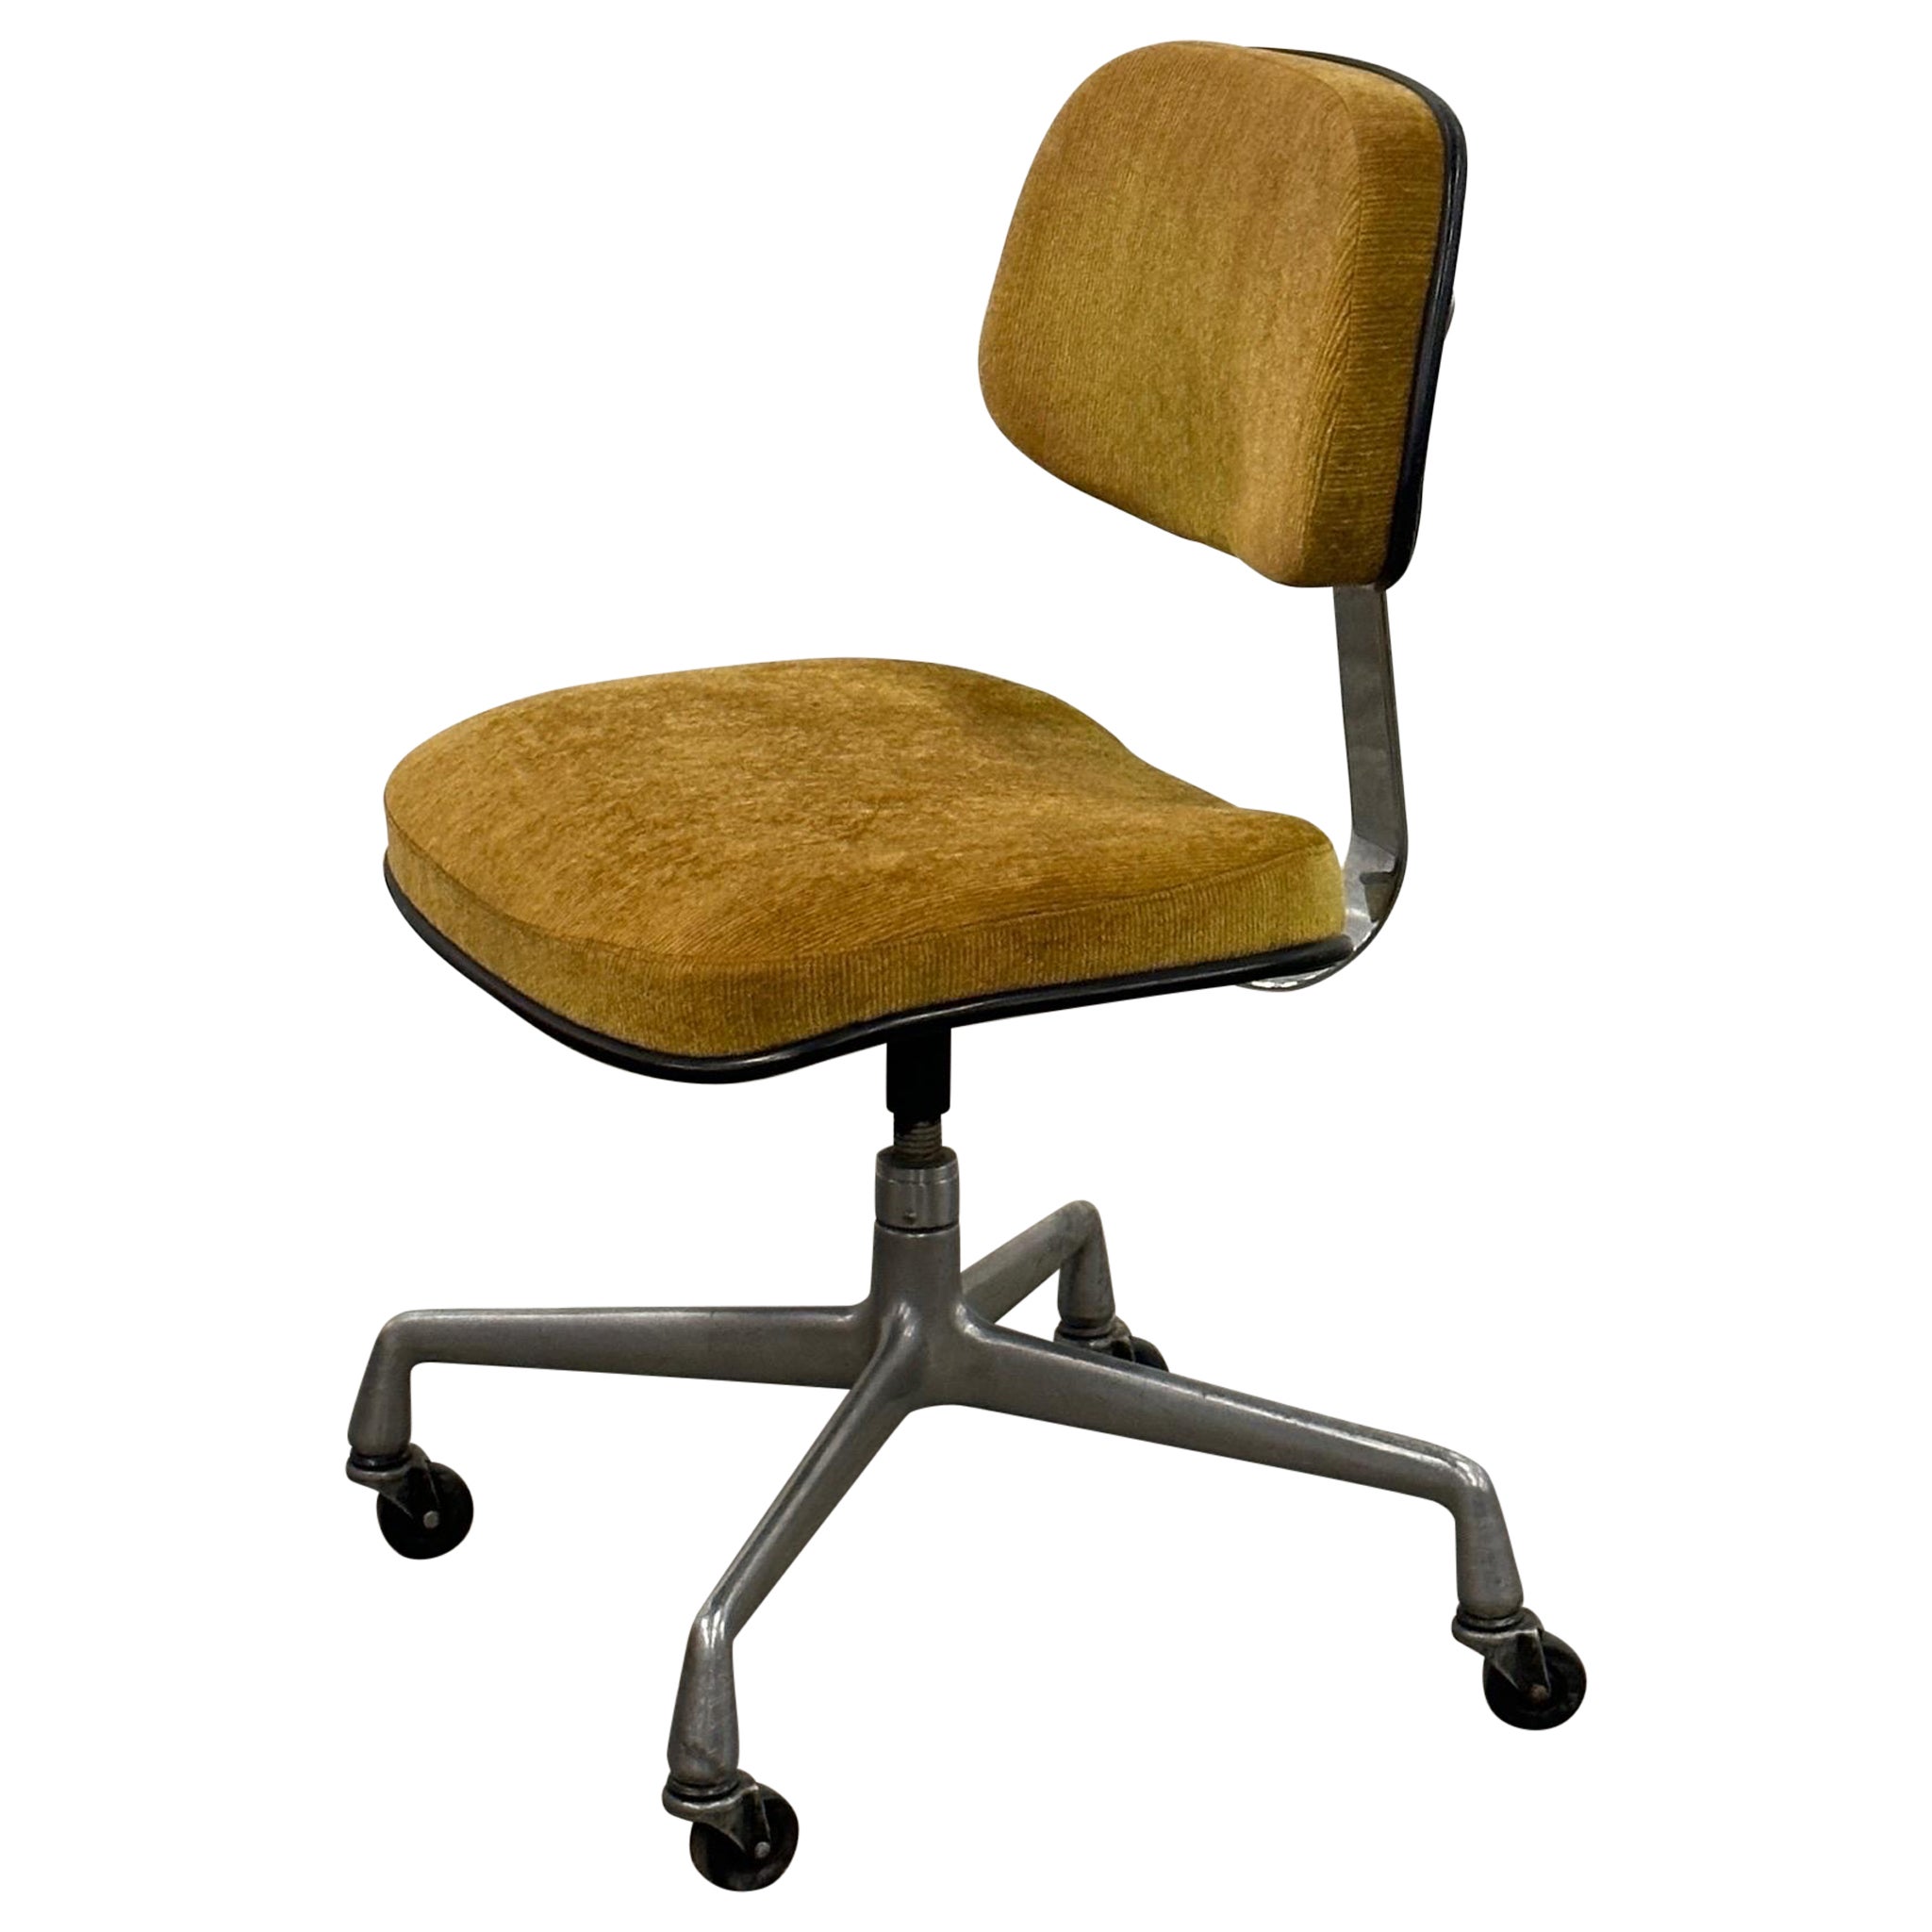 EC228 Secretary Chair by Charles and Ray Eames for Herman Miller